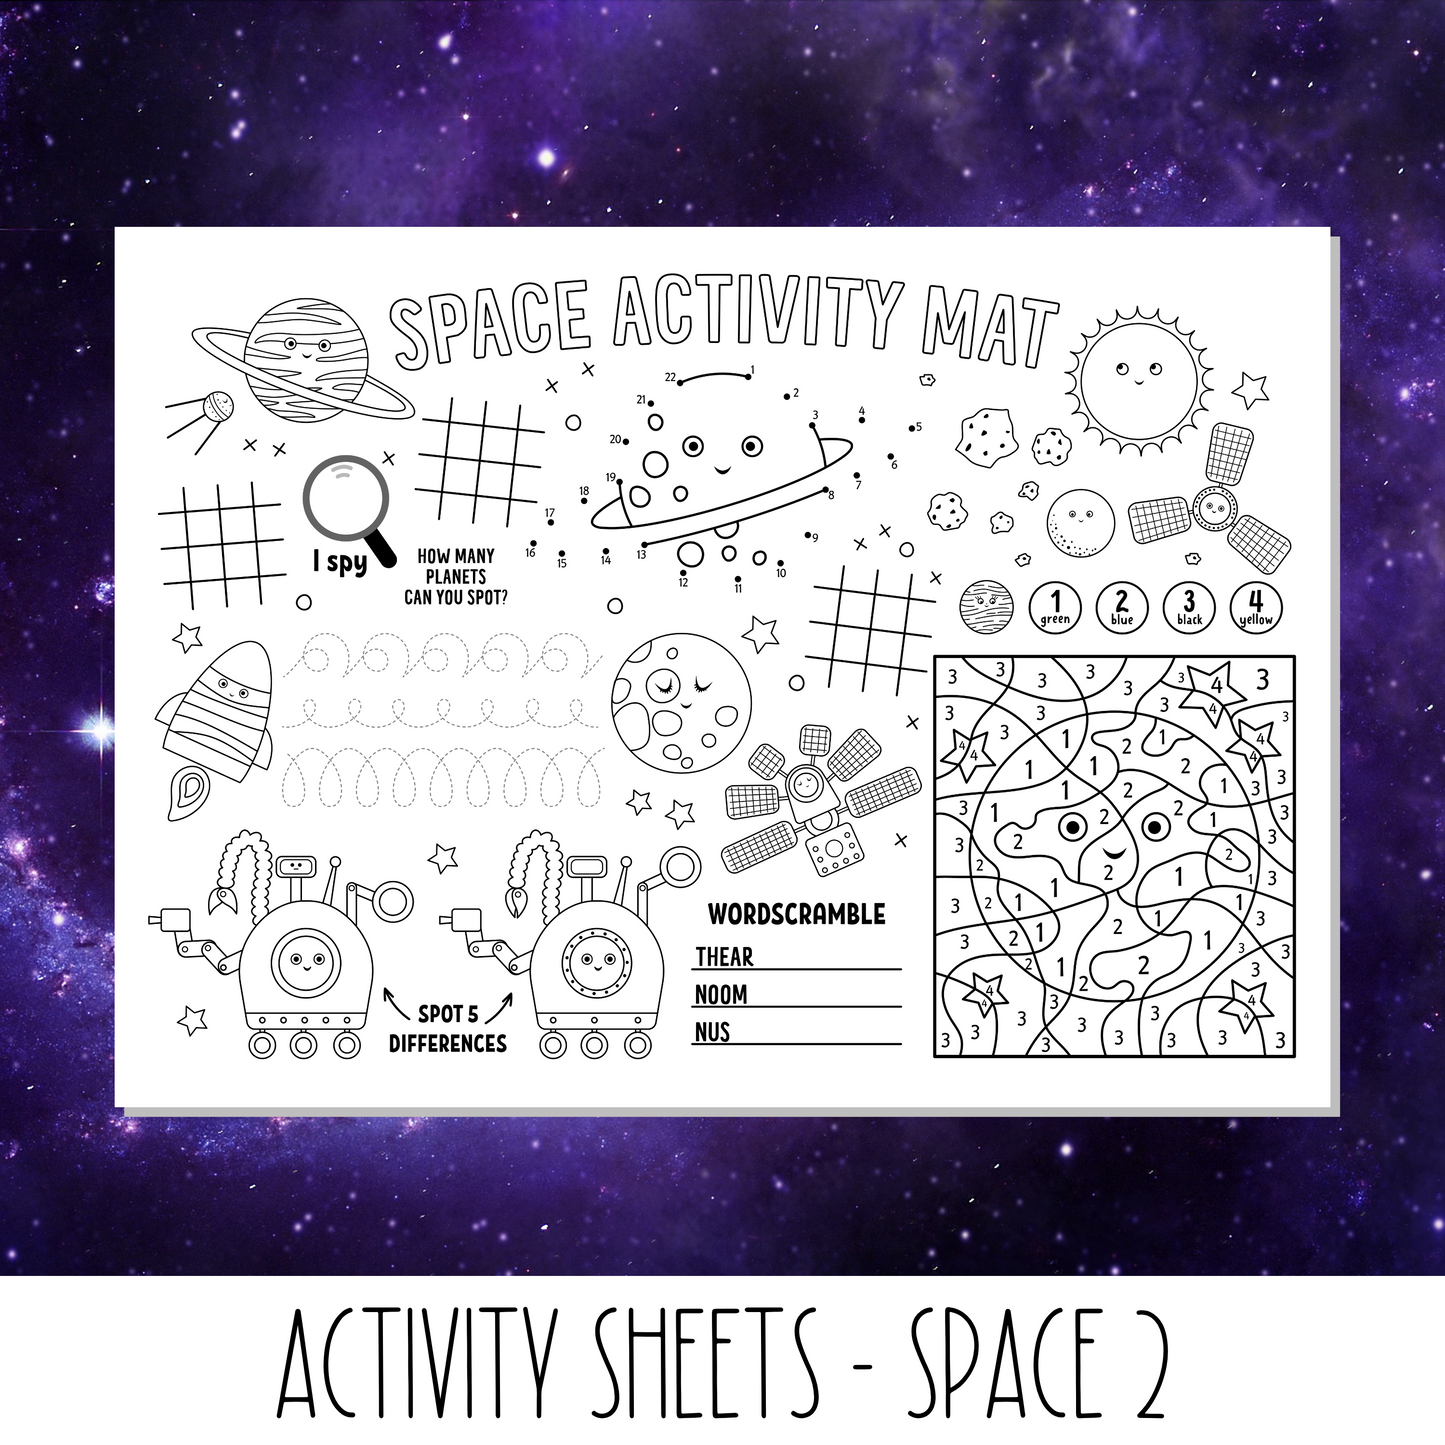 Kids Activity Sheets - Space 2